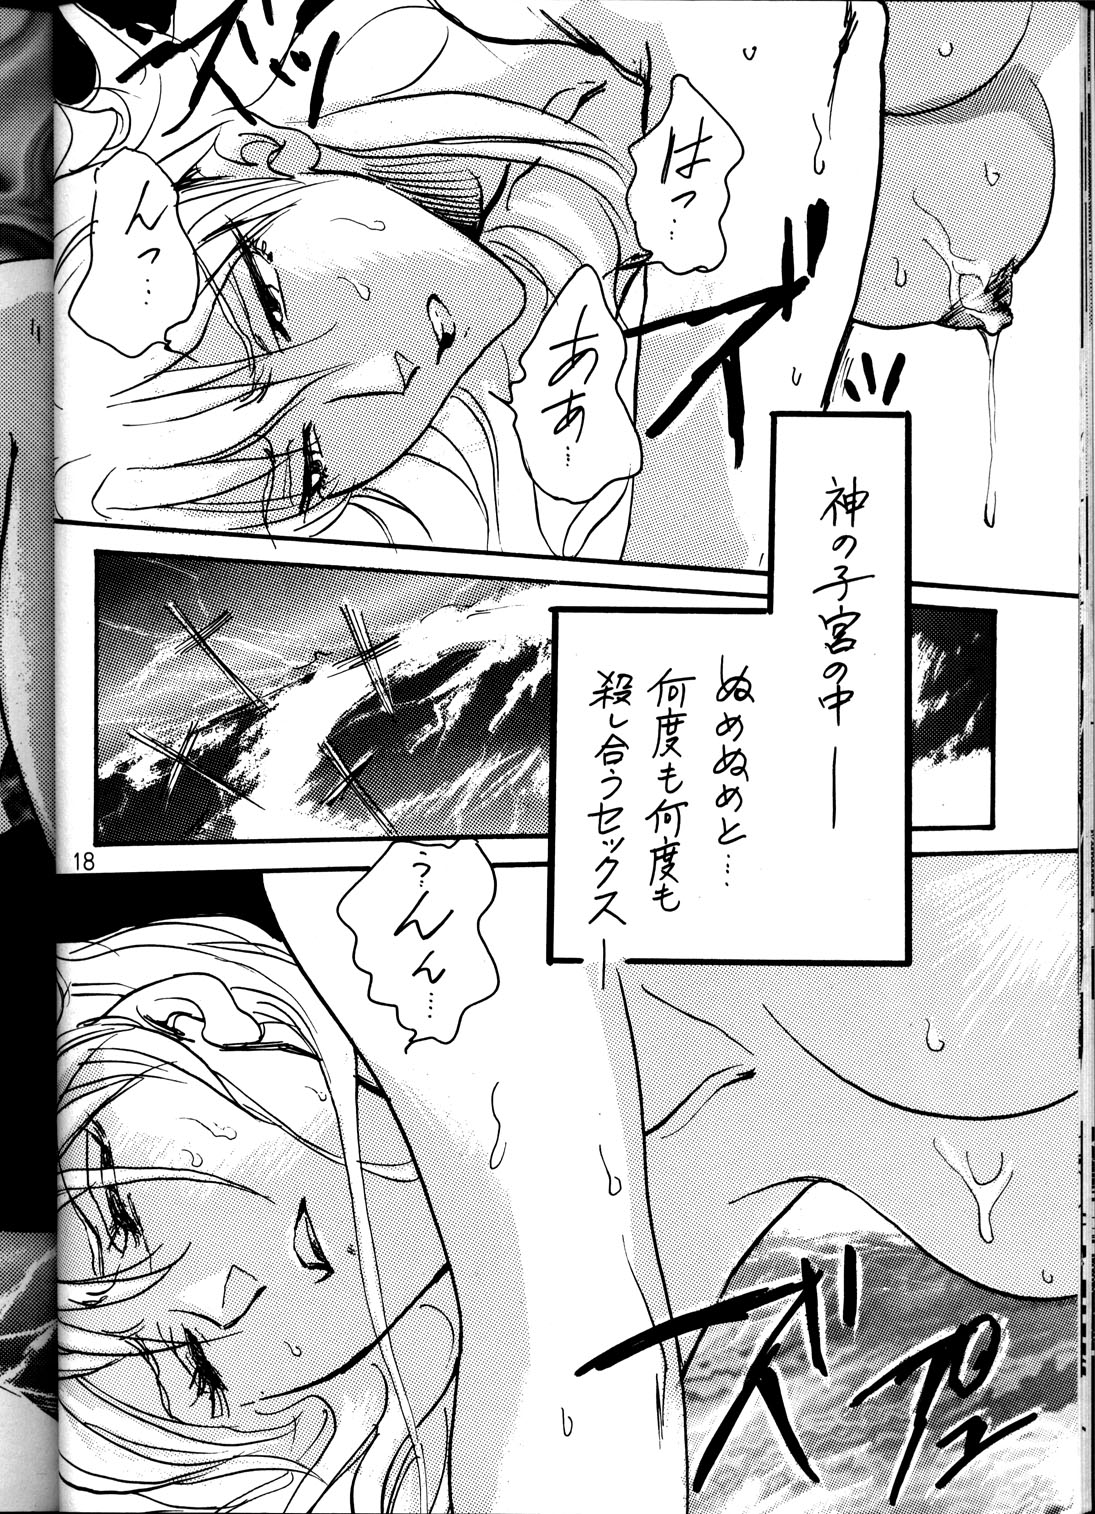 [Nabarl Doumei] Lonely Moon (Evangelion) page 17 full